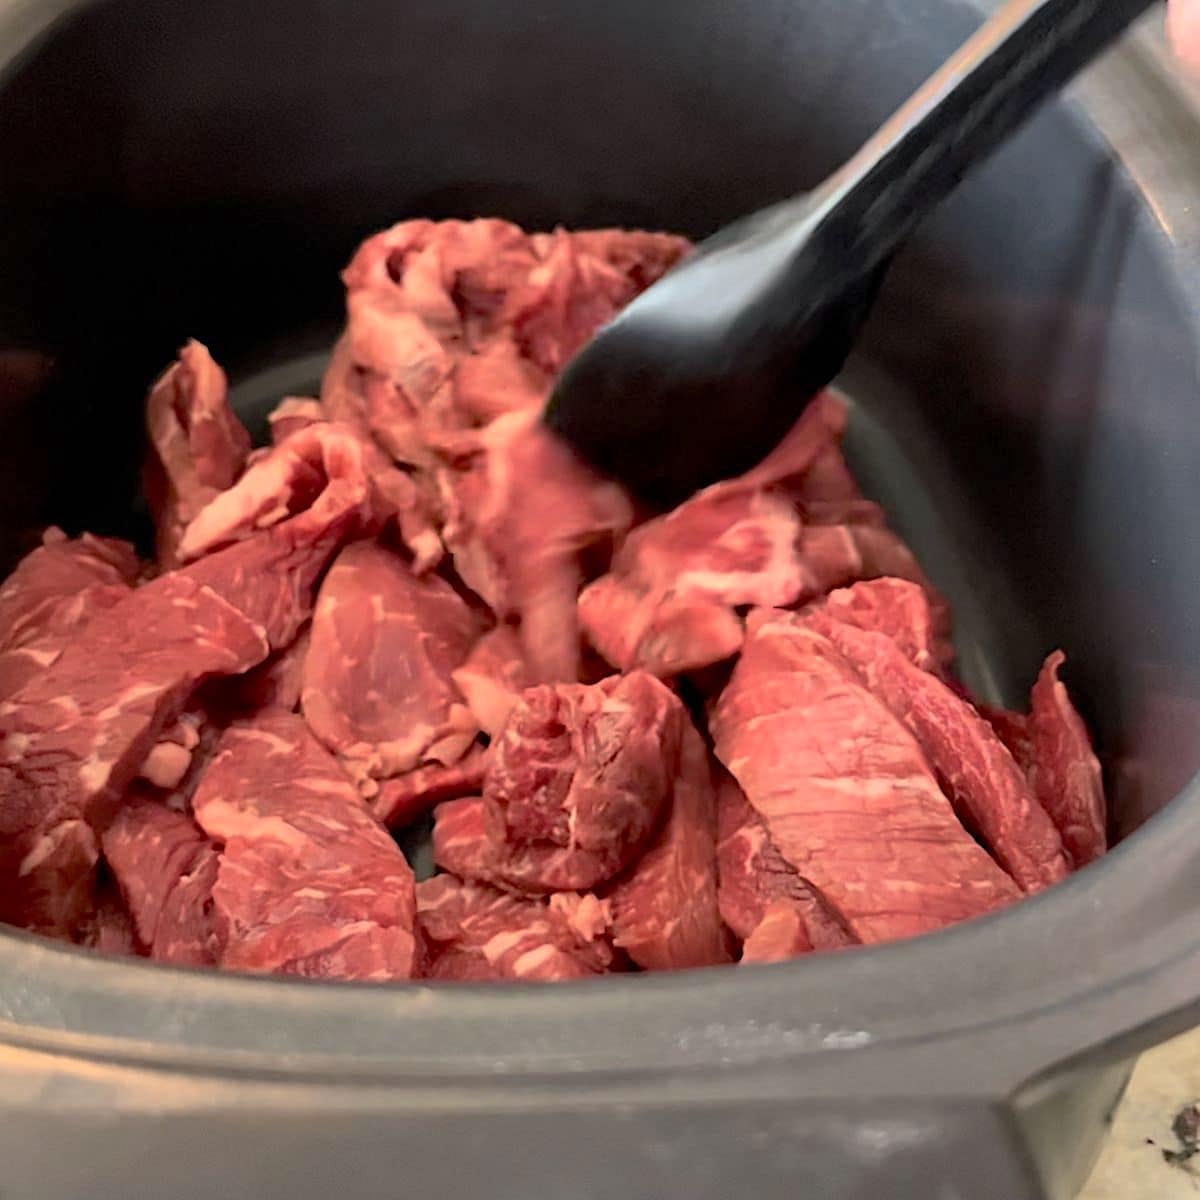 Placing the sirloin steak slices in the crock pot.